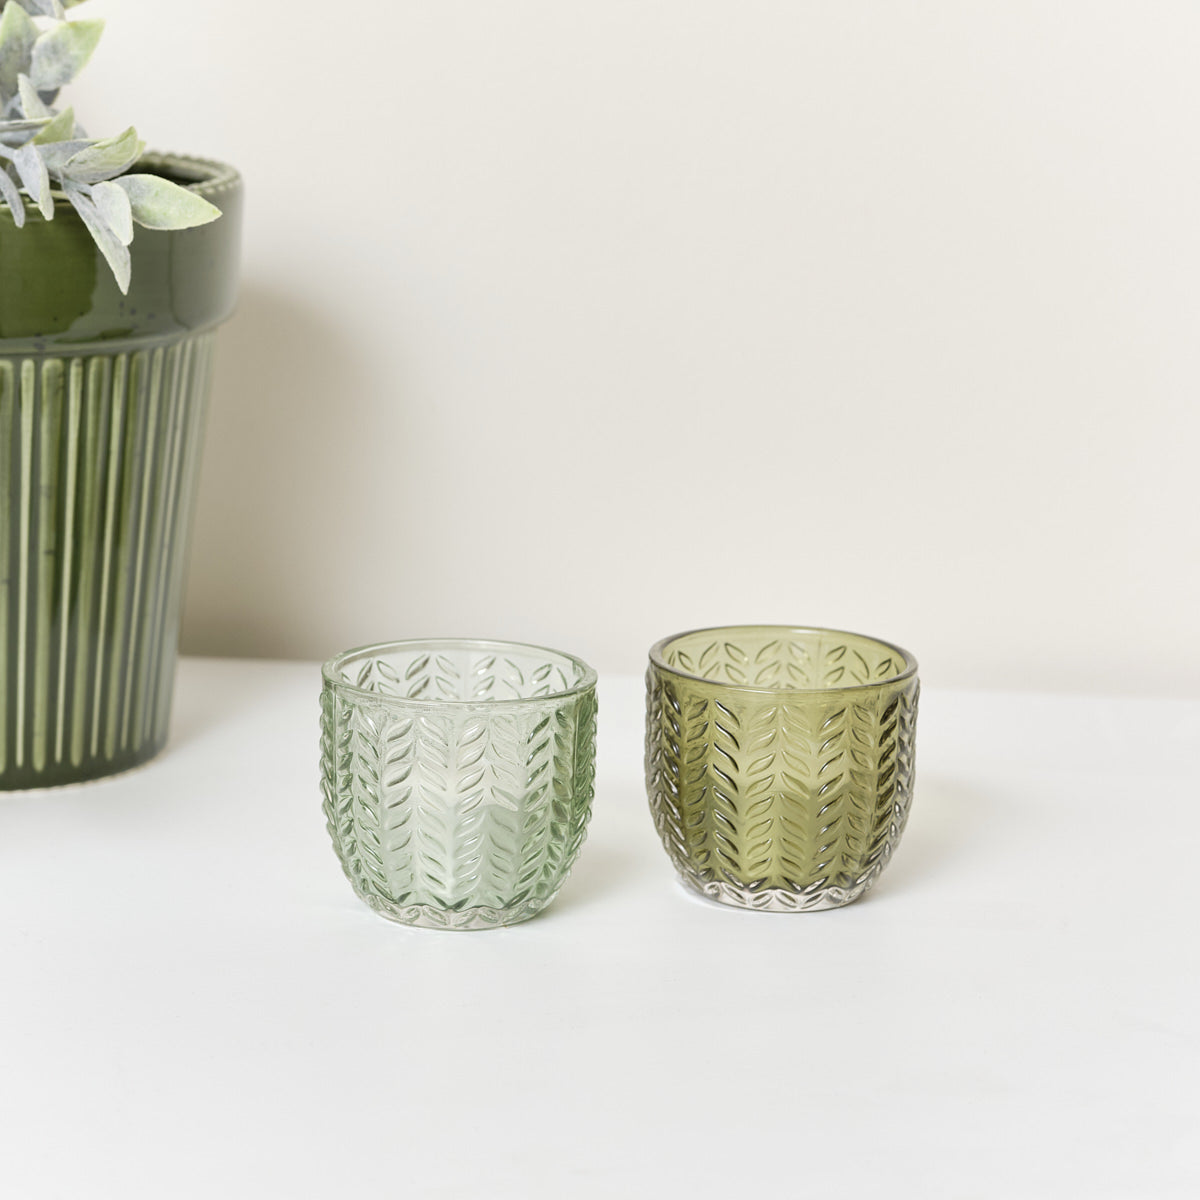 Set of 2 Small Green Glass Tealight Holders